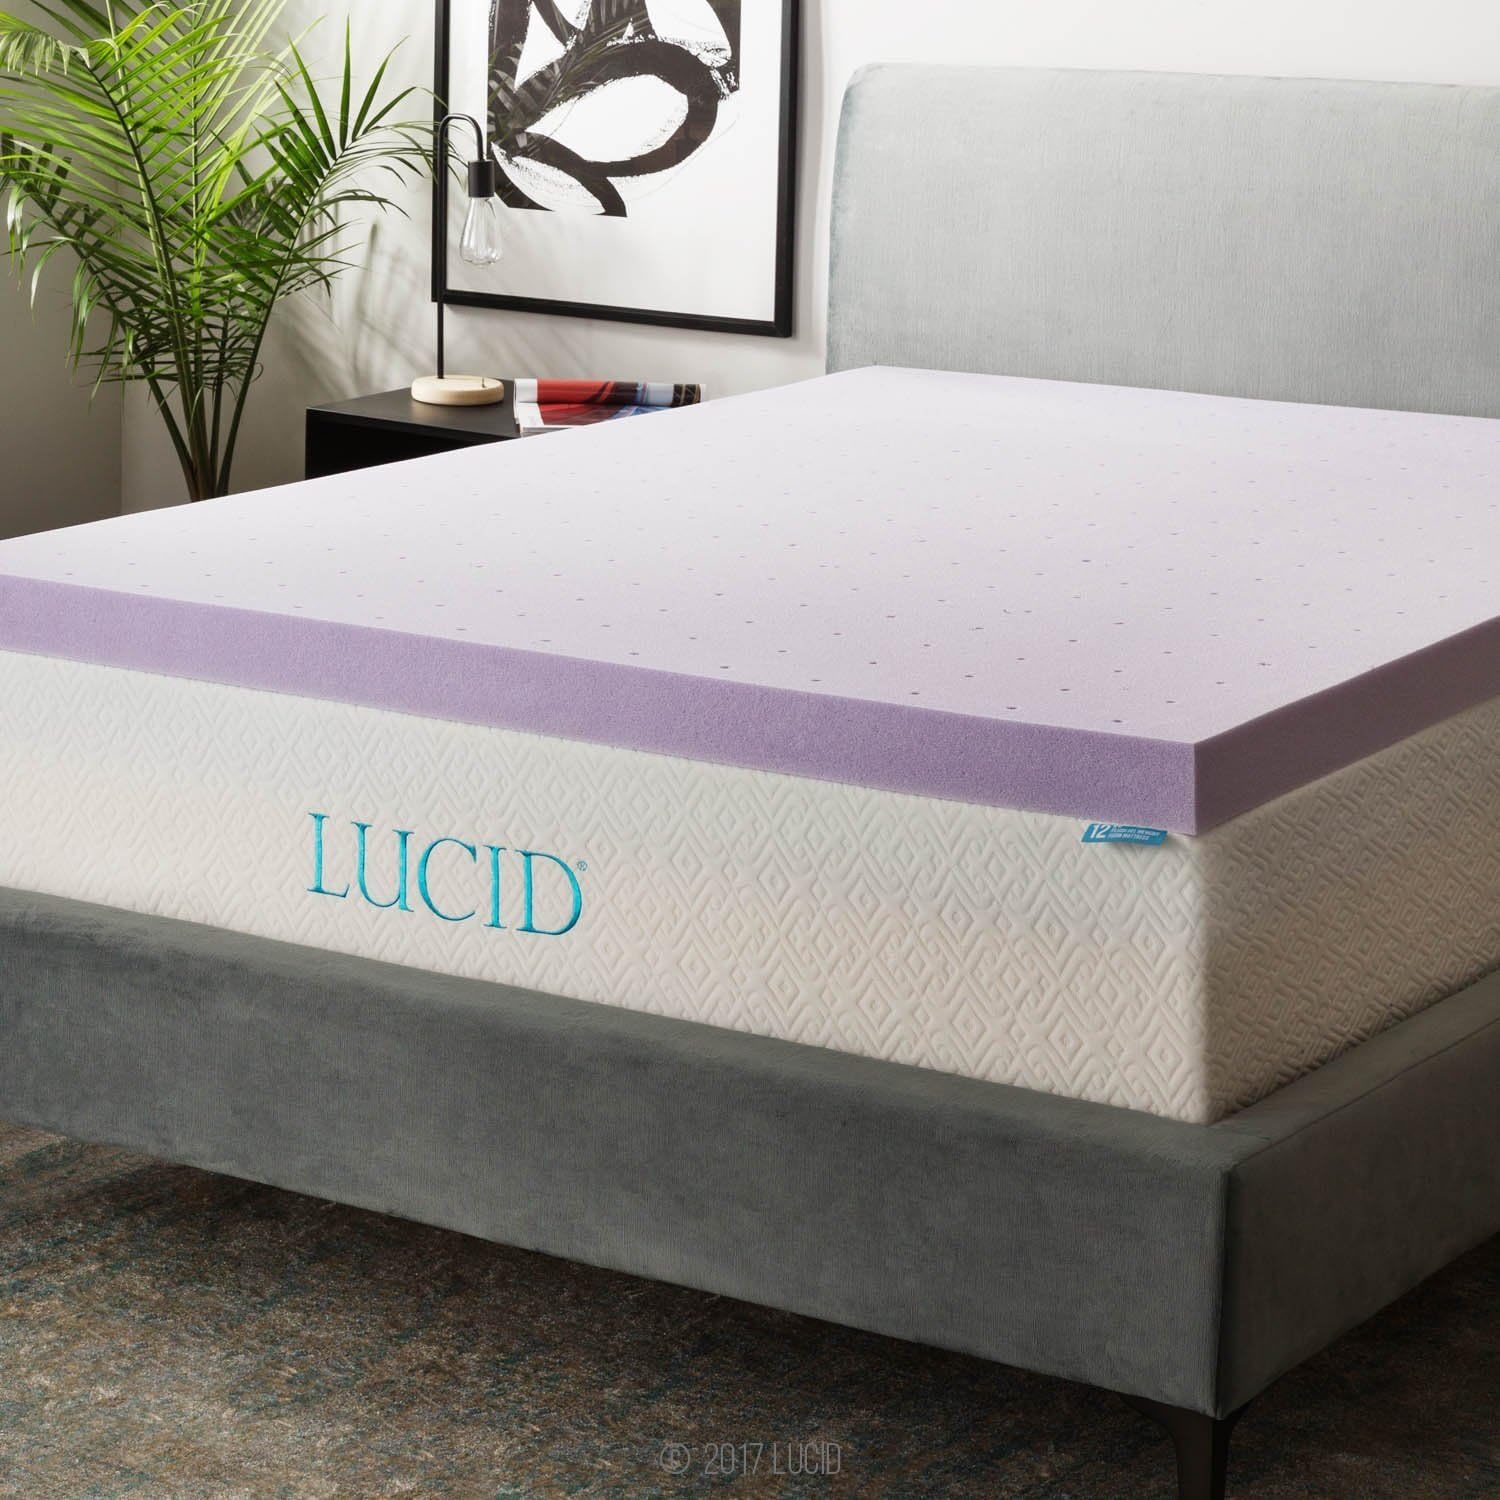 LUCID 3 Inch Lavender Infused Memory Foam Mattress Topper - Ventilated Design - Cal King Size